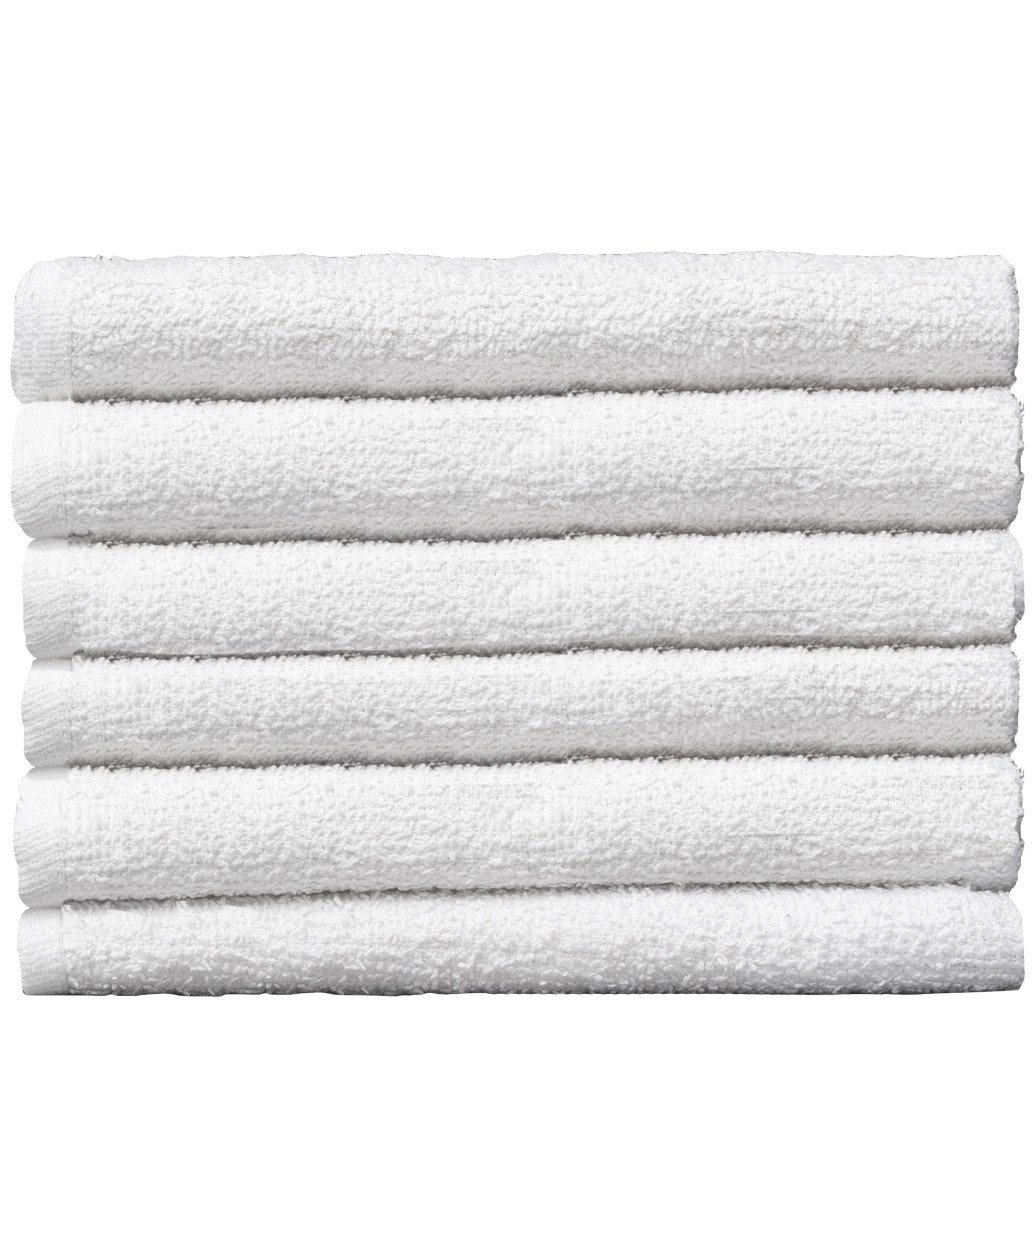 12 Pack White Towels from Buy-Rite Beauty